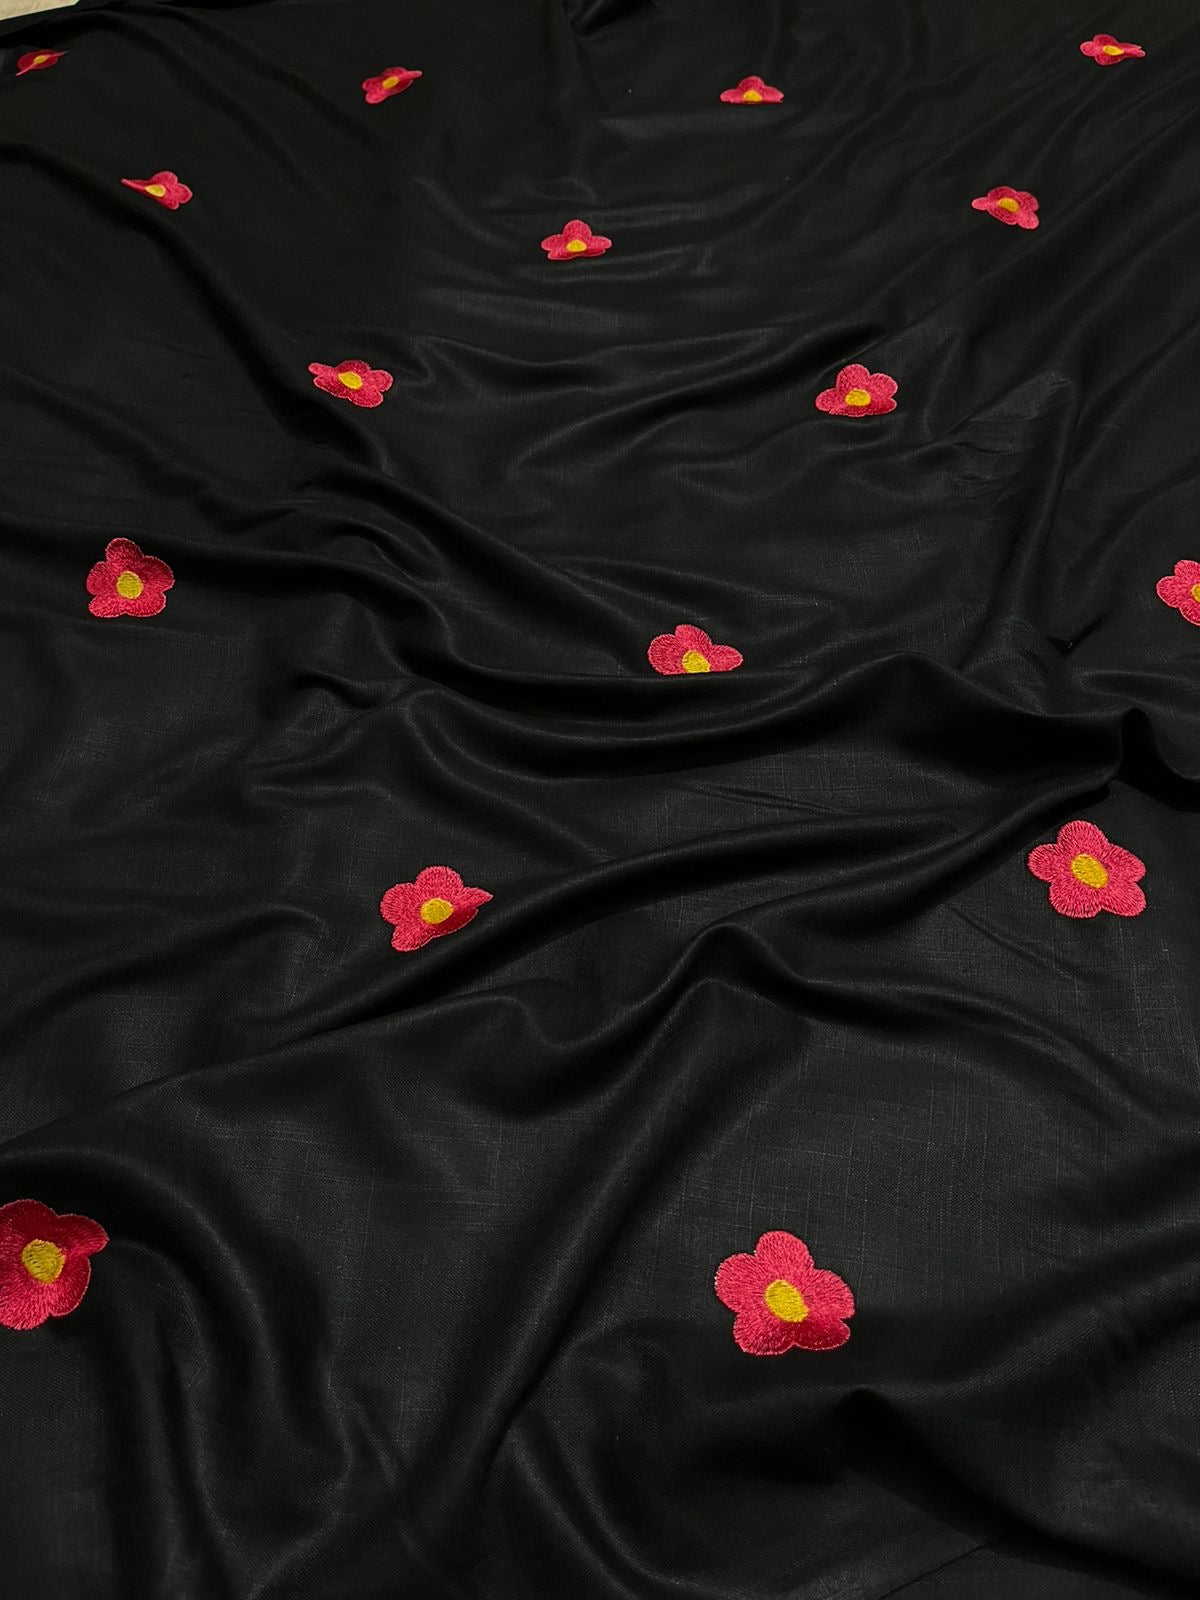 Handloom 100% Viscose Fabric with Embroidery motif - Black with Pink floral embroidery